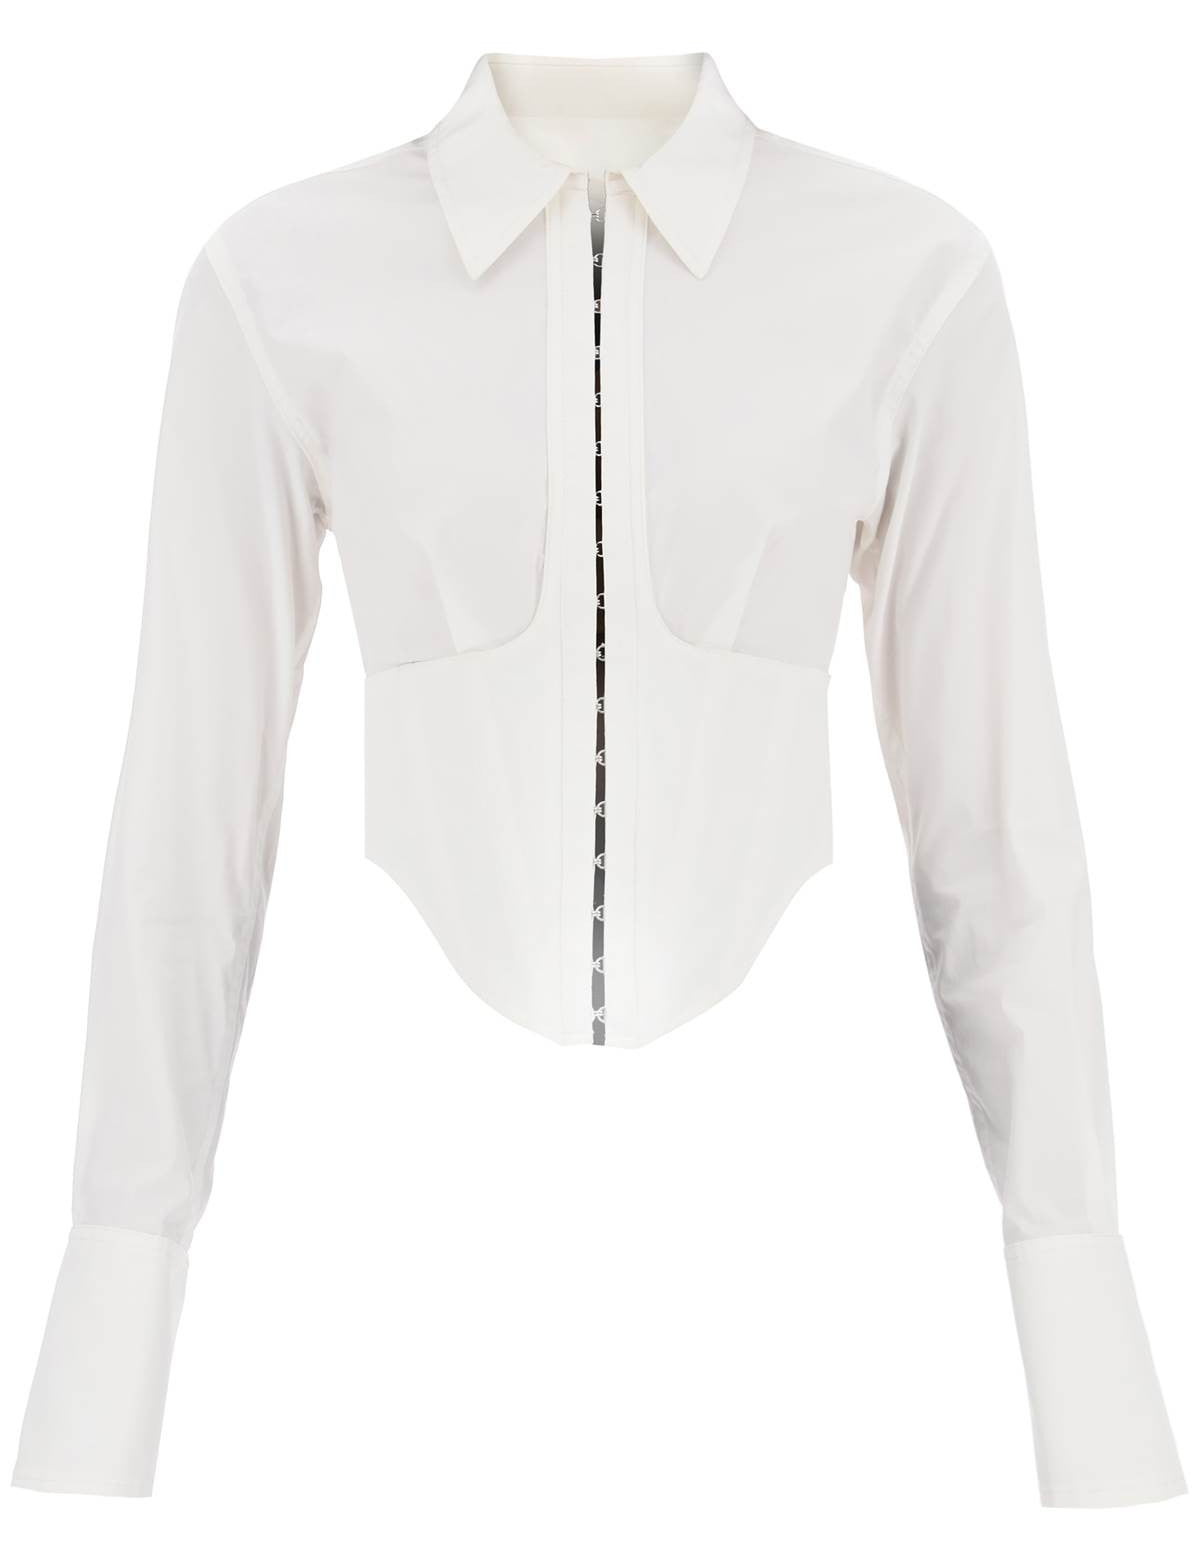 dion-lee-cropped-shirt-with-underbust-corset.jpg